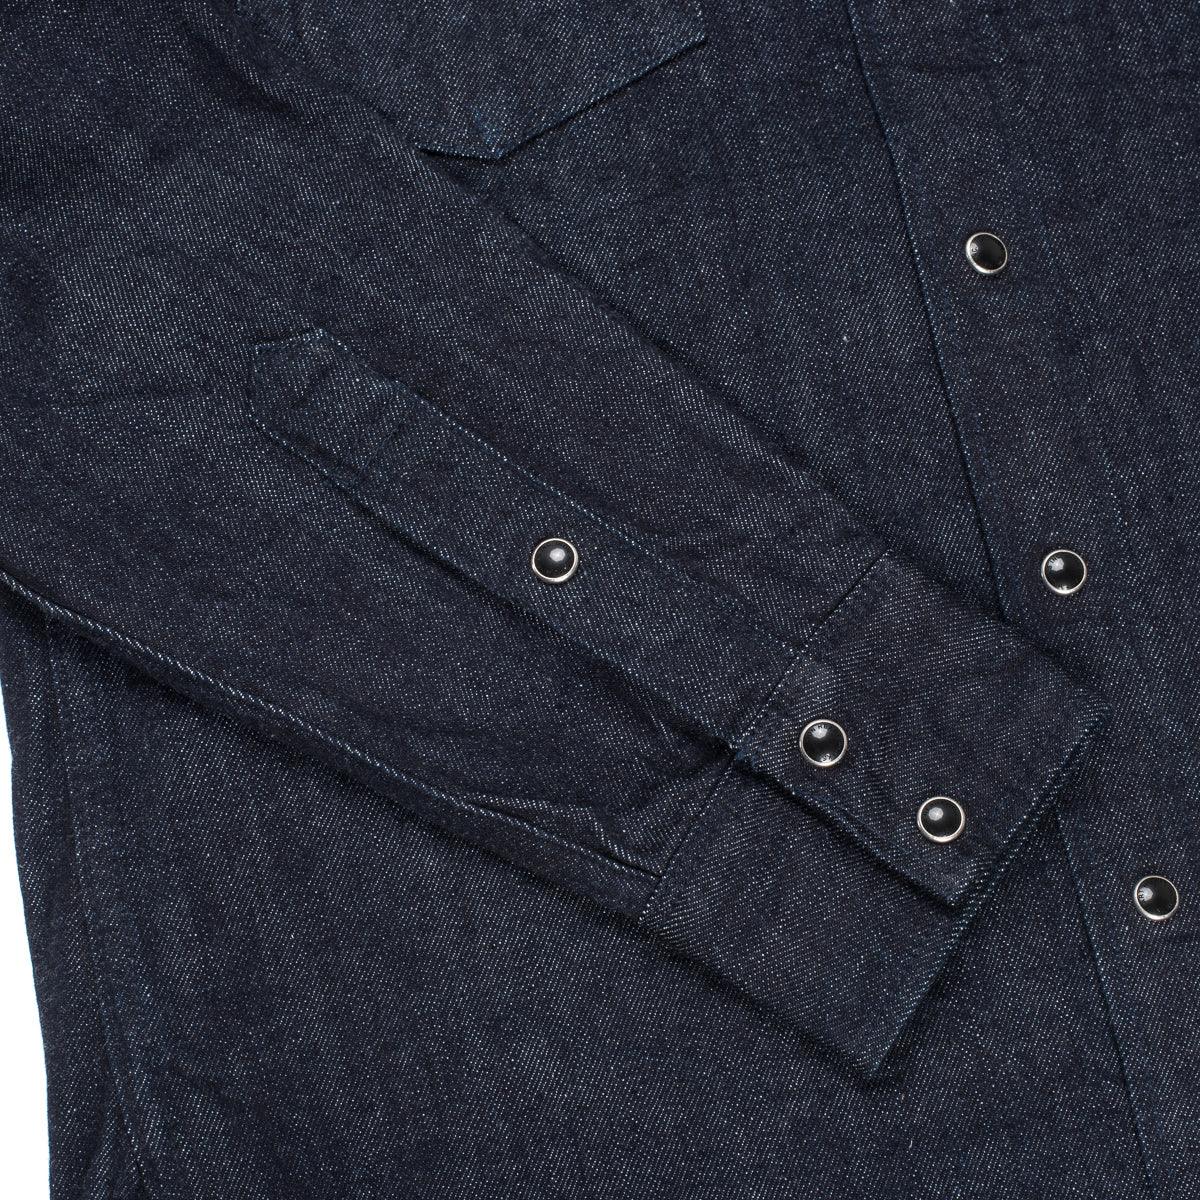 Image showing the IHSH-33-T - 12oz Selvedge Denim Western Shirt With Tonal Stitching - Indigo which is a Shirts described by the following info Iron Heart, Released, Shirts, Tops and sold on the IRON HEART GERMANY online store